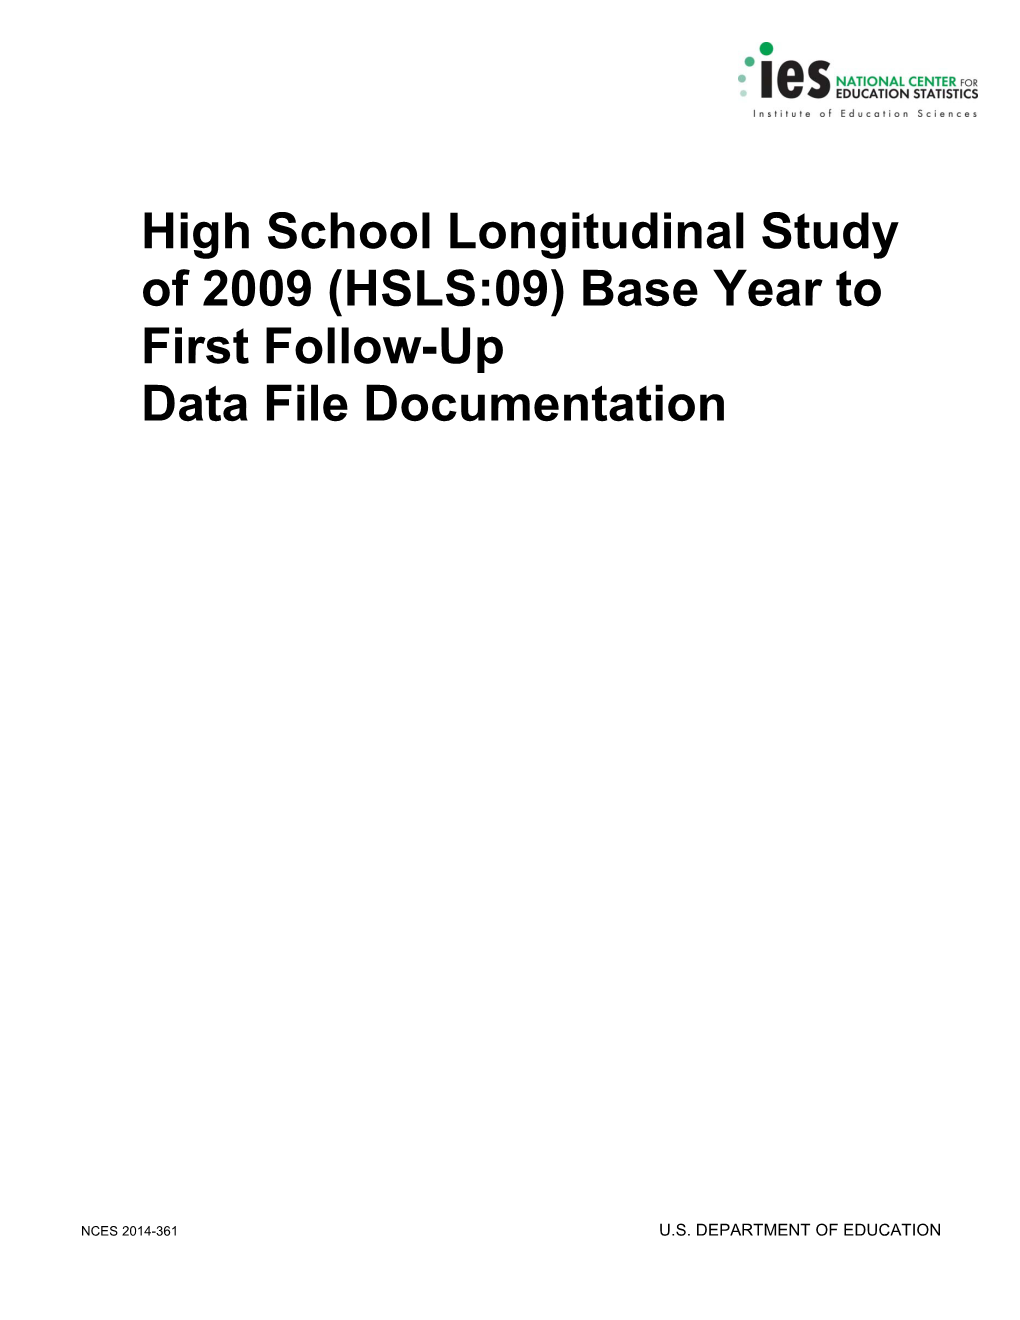 (HSLS:09) Base Year to First Follow-Up Data File Documentation